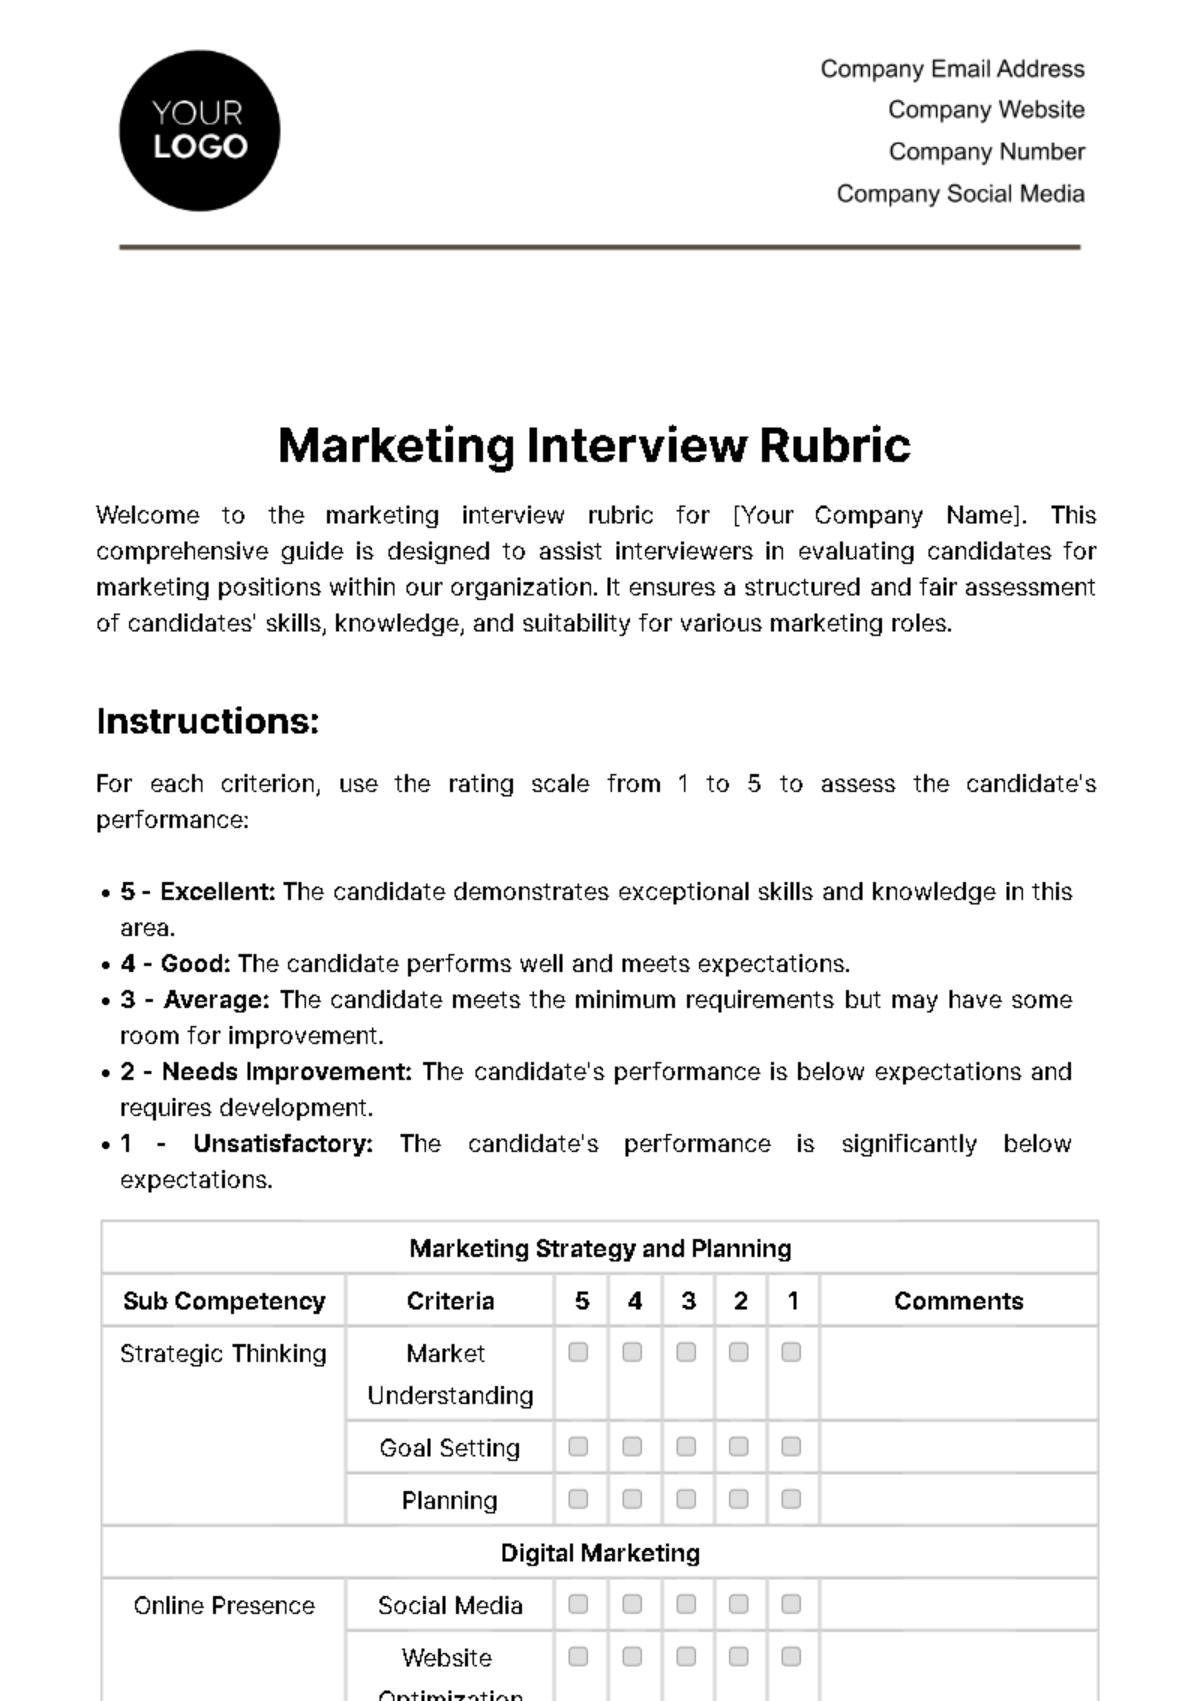 Free Marketing Interview Rubric Template